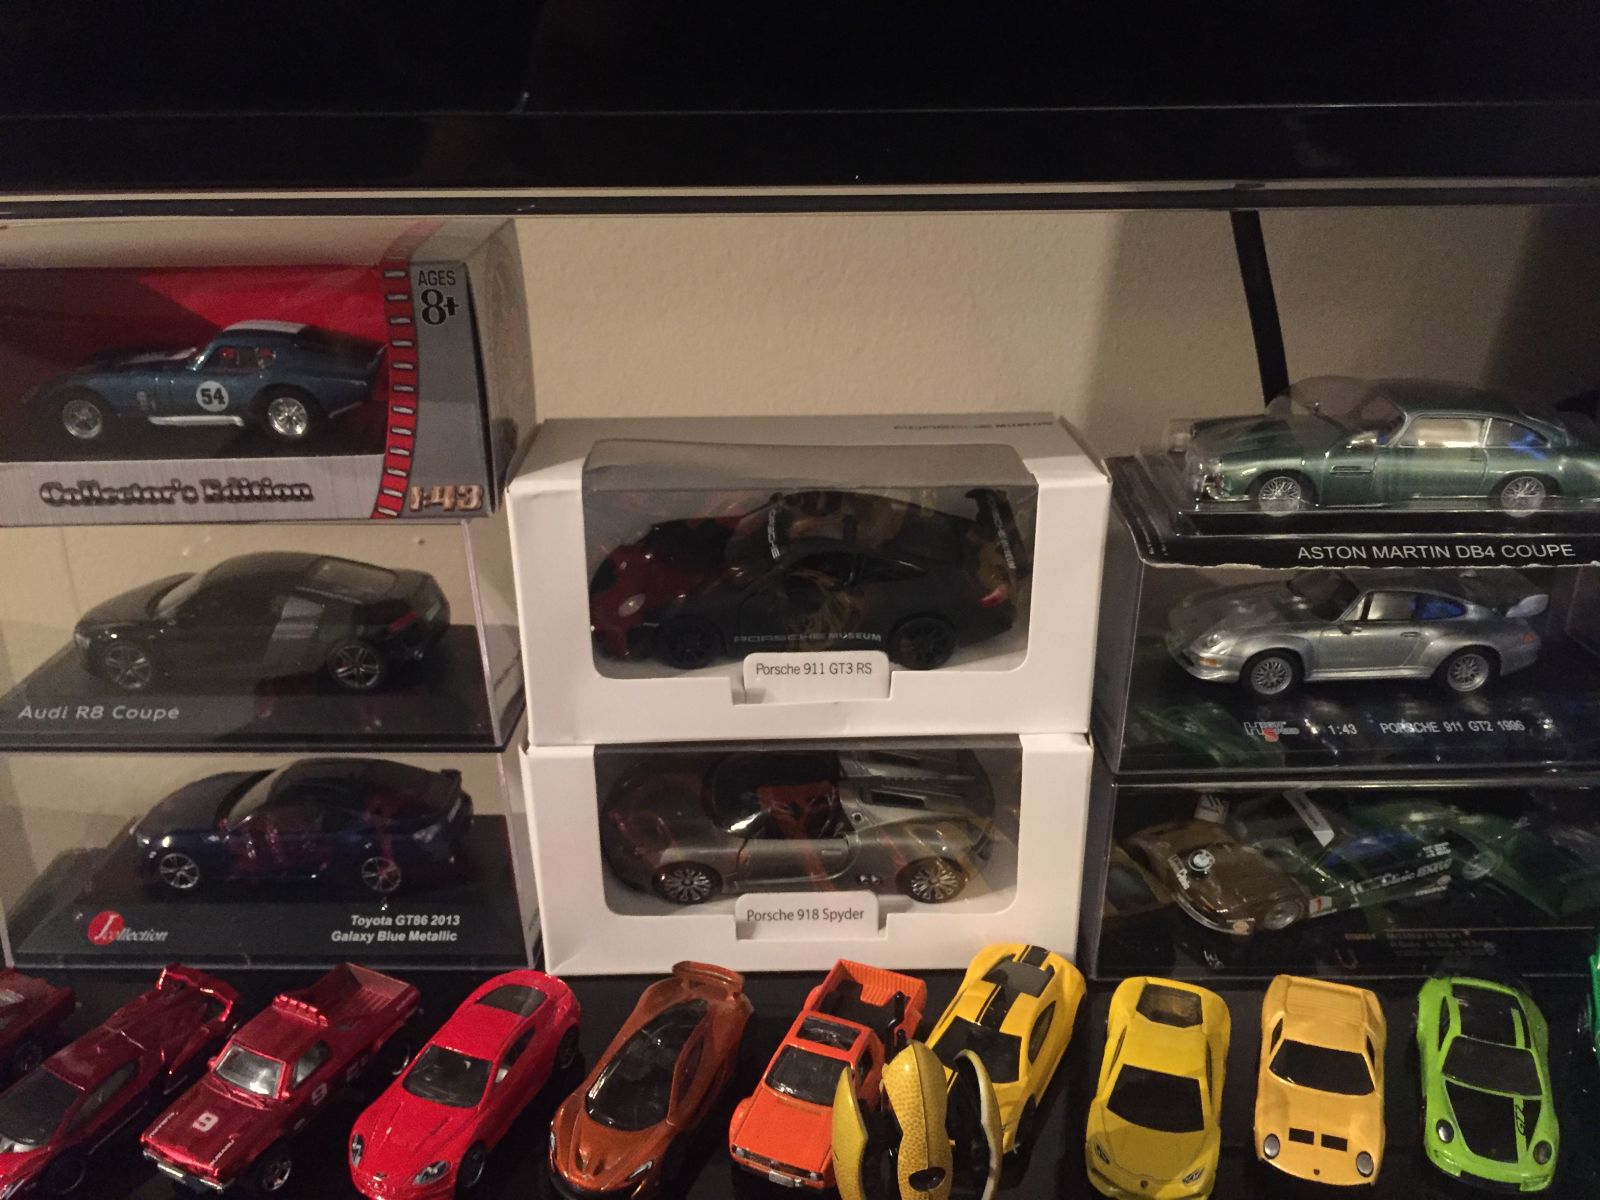 I still can’t find any cases for these 1:43 models. Anyone have ideas on where I can get empty 1:43 sized acrylic display cases like you see for the GT86 and R8? 